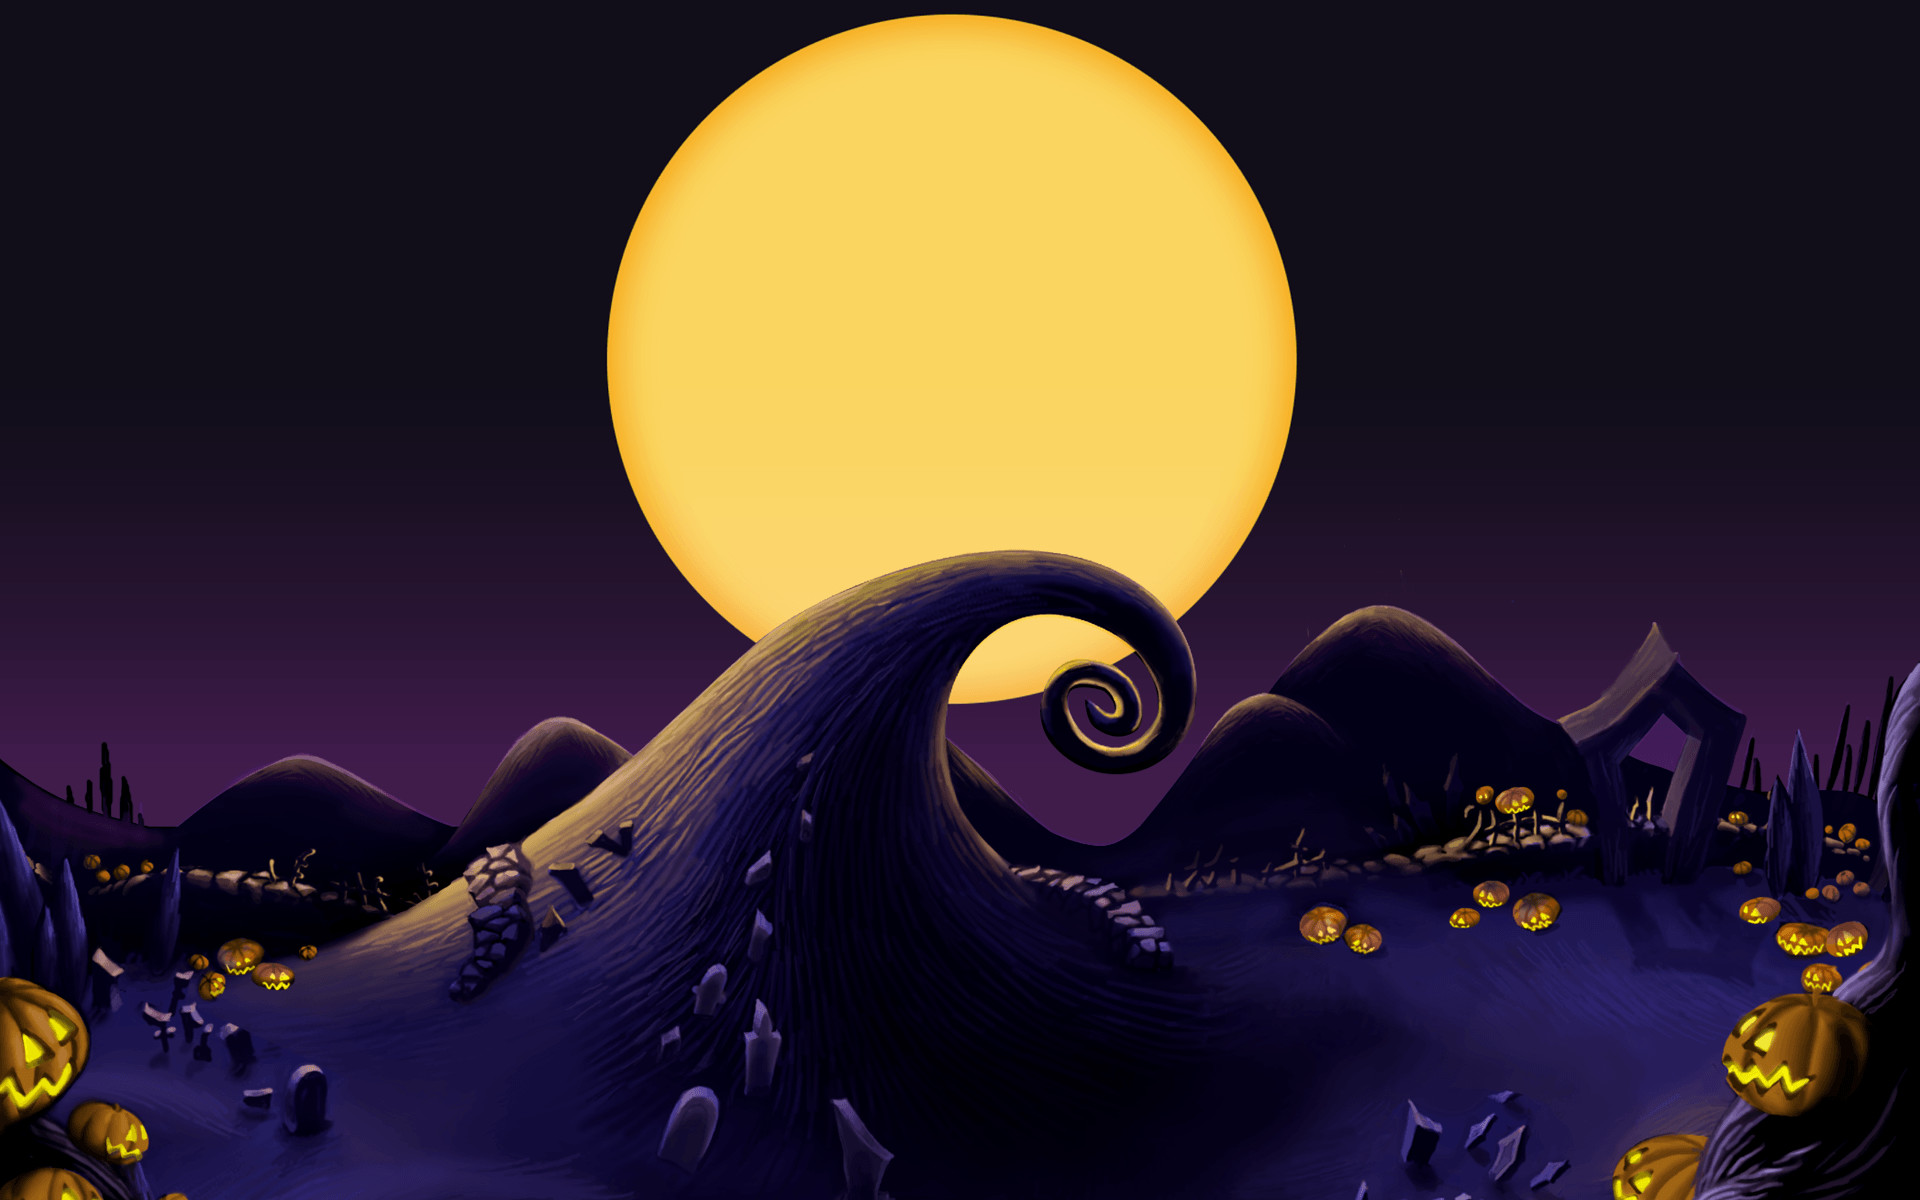 640x1136 The Nightmare Before Christmas Landscape Iphone 5 wallpaper